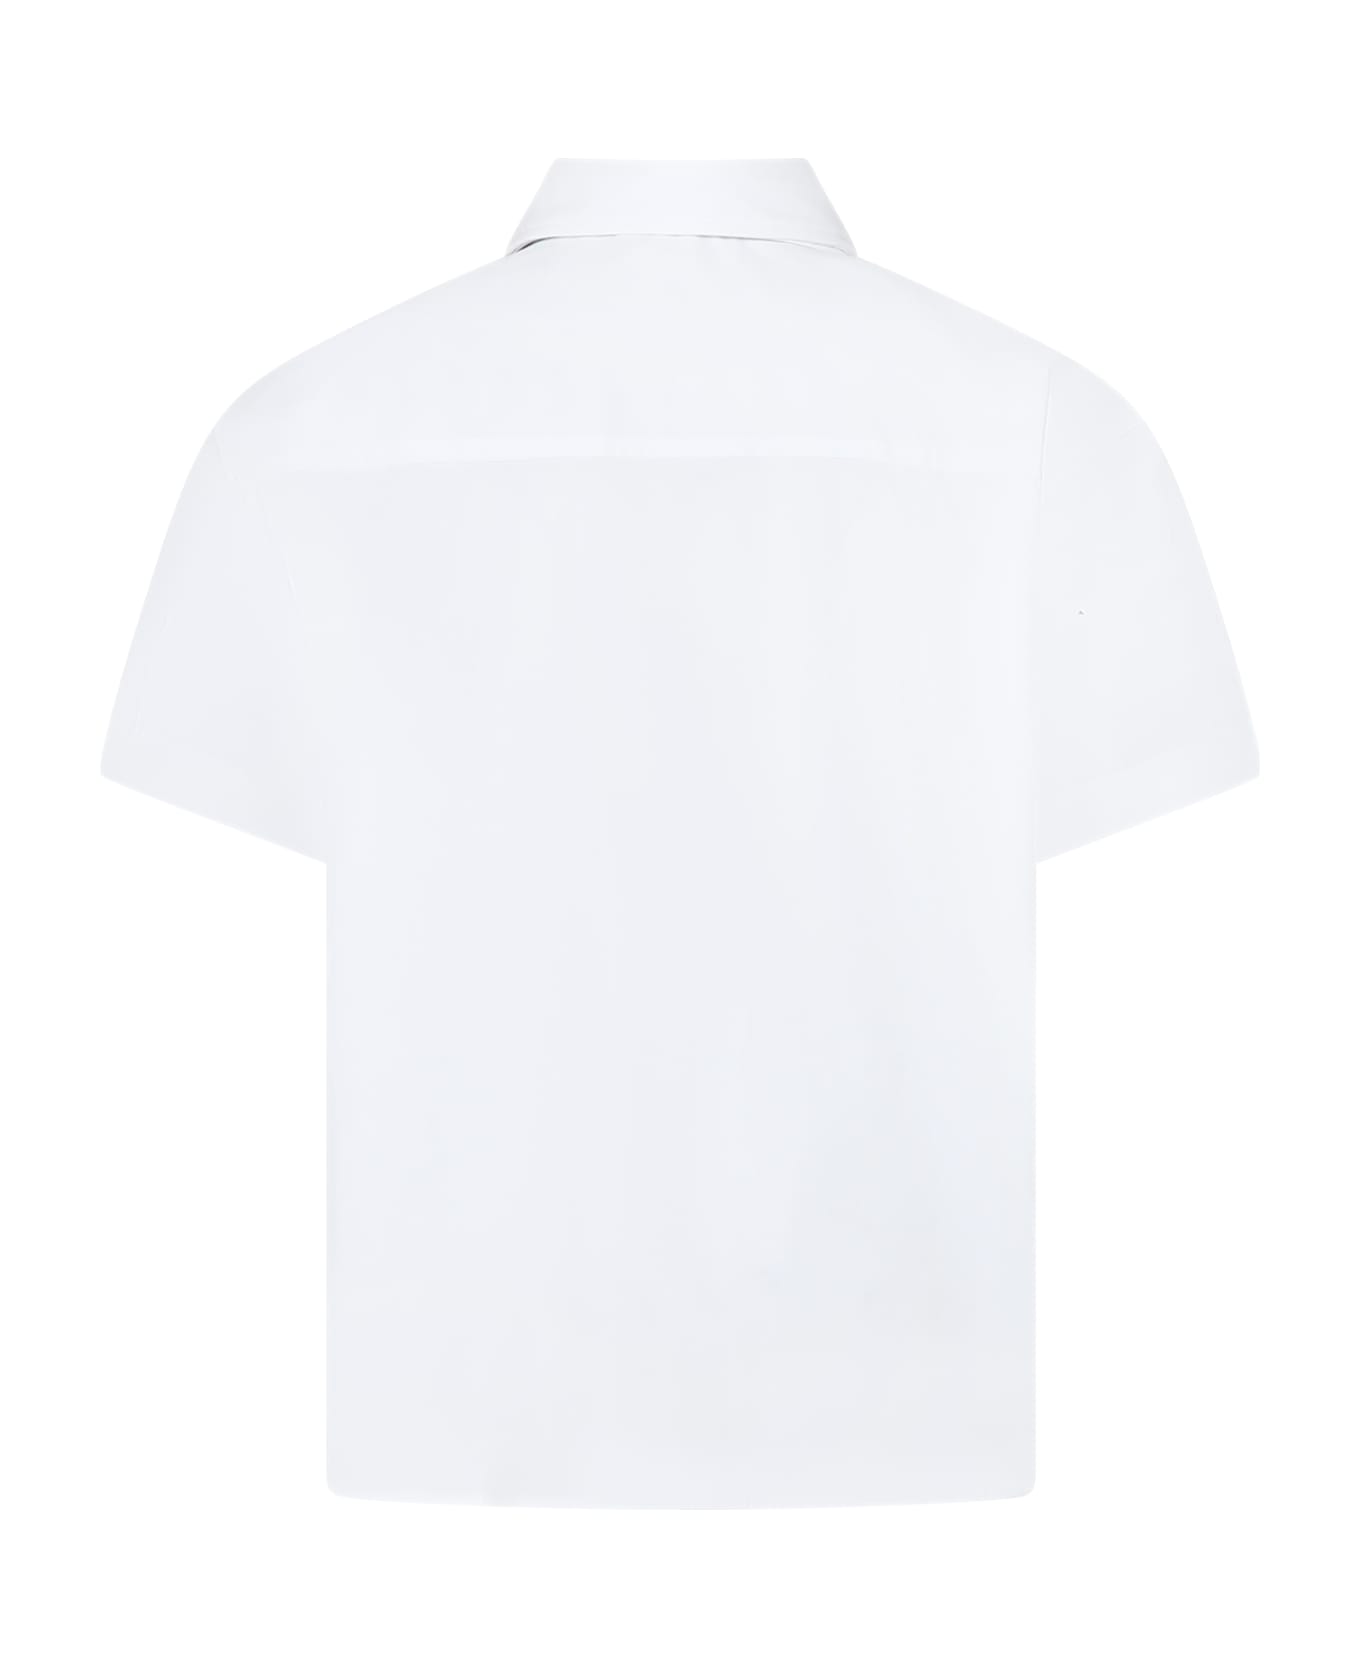 Burberry White Shirt For Boy With Print - White